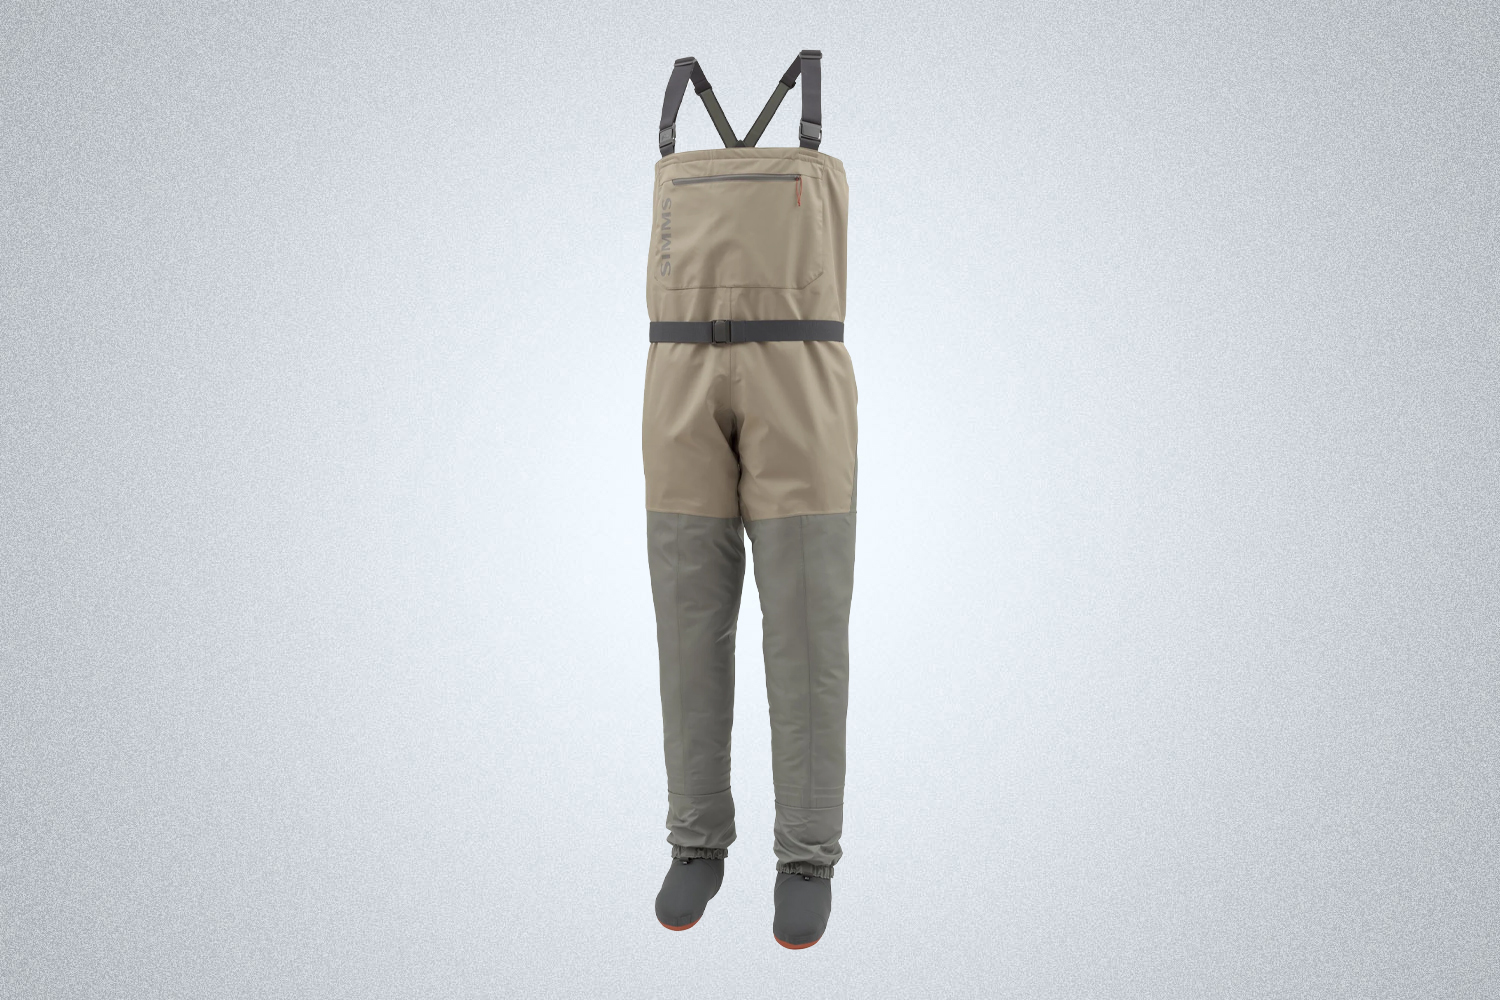 The Simms Tributary Waders are a great pair of beginner fly fishing waders in 2022